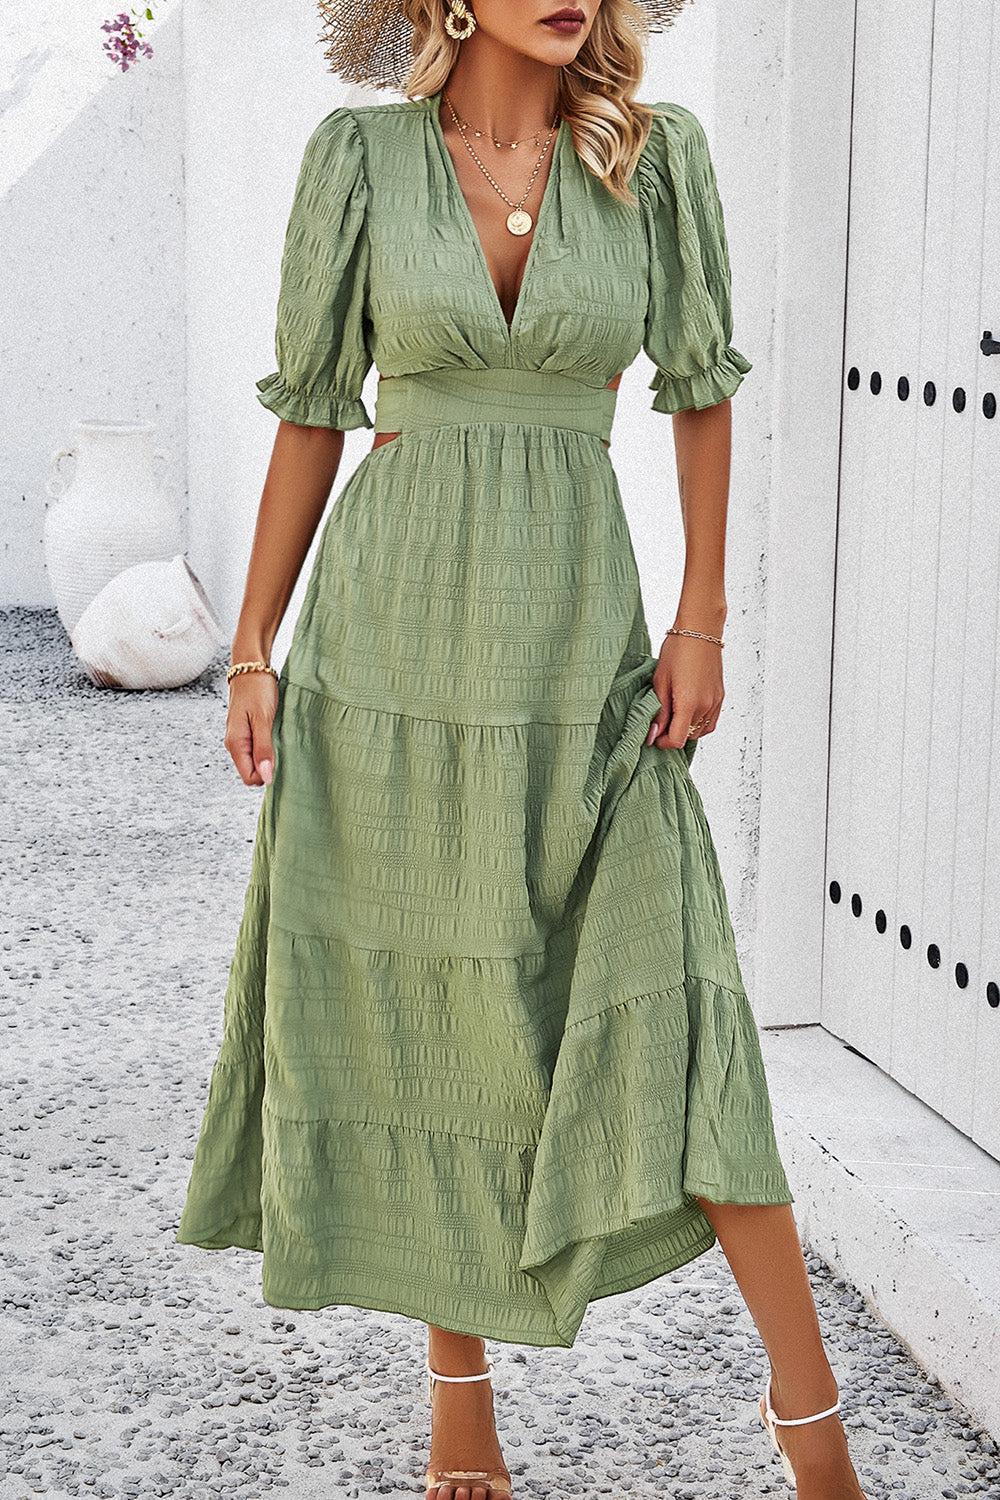 a woman wearing a green dress and straw hat